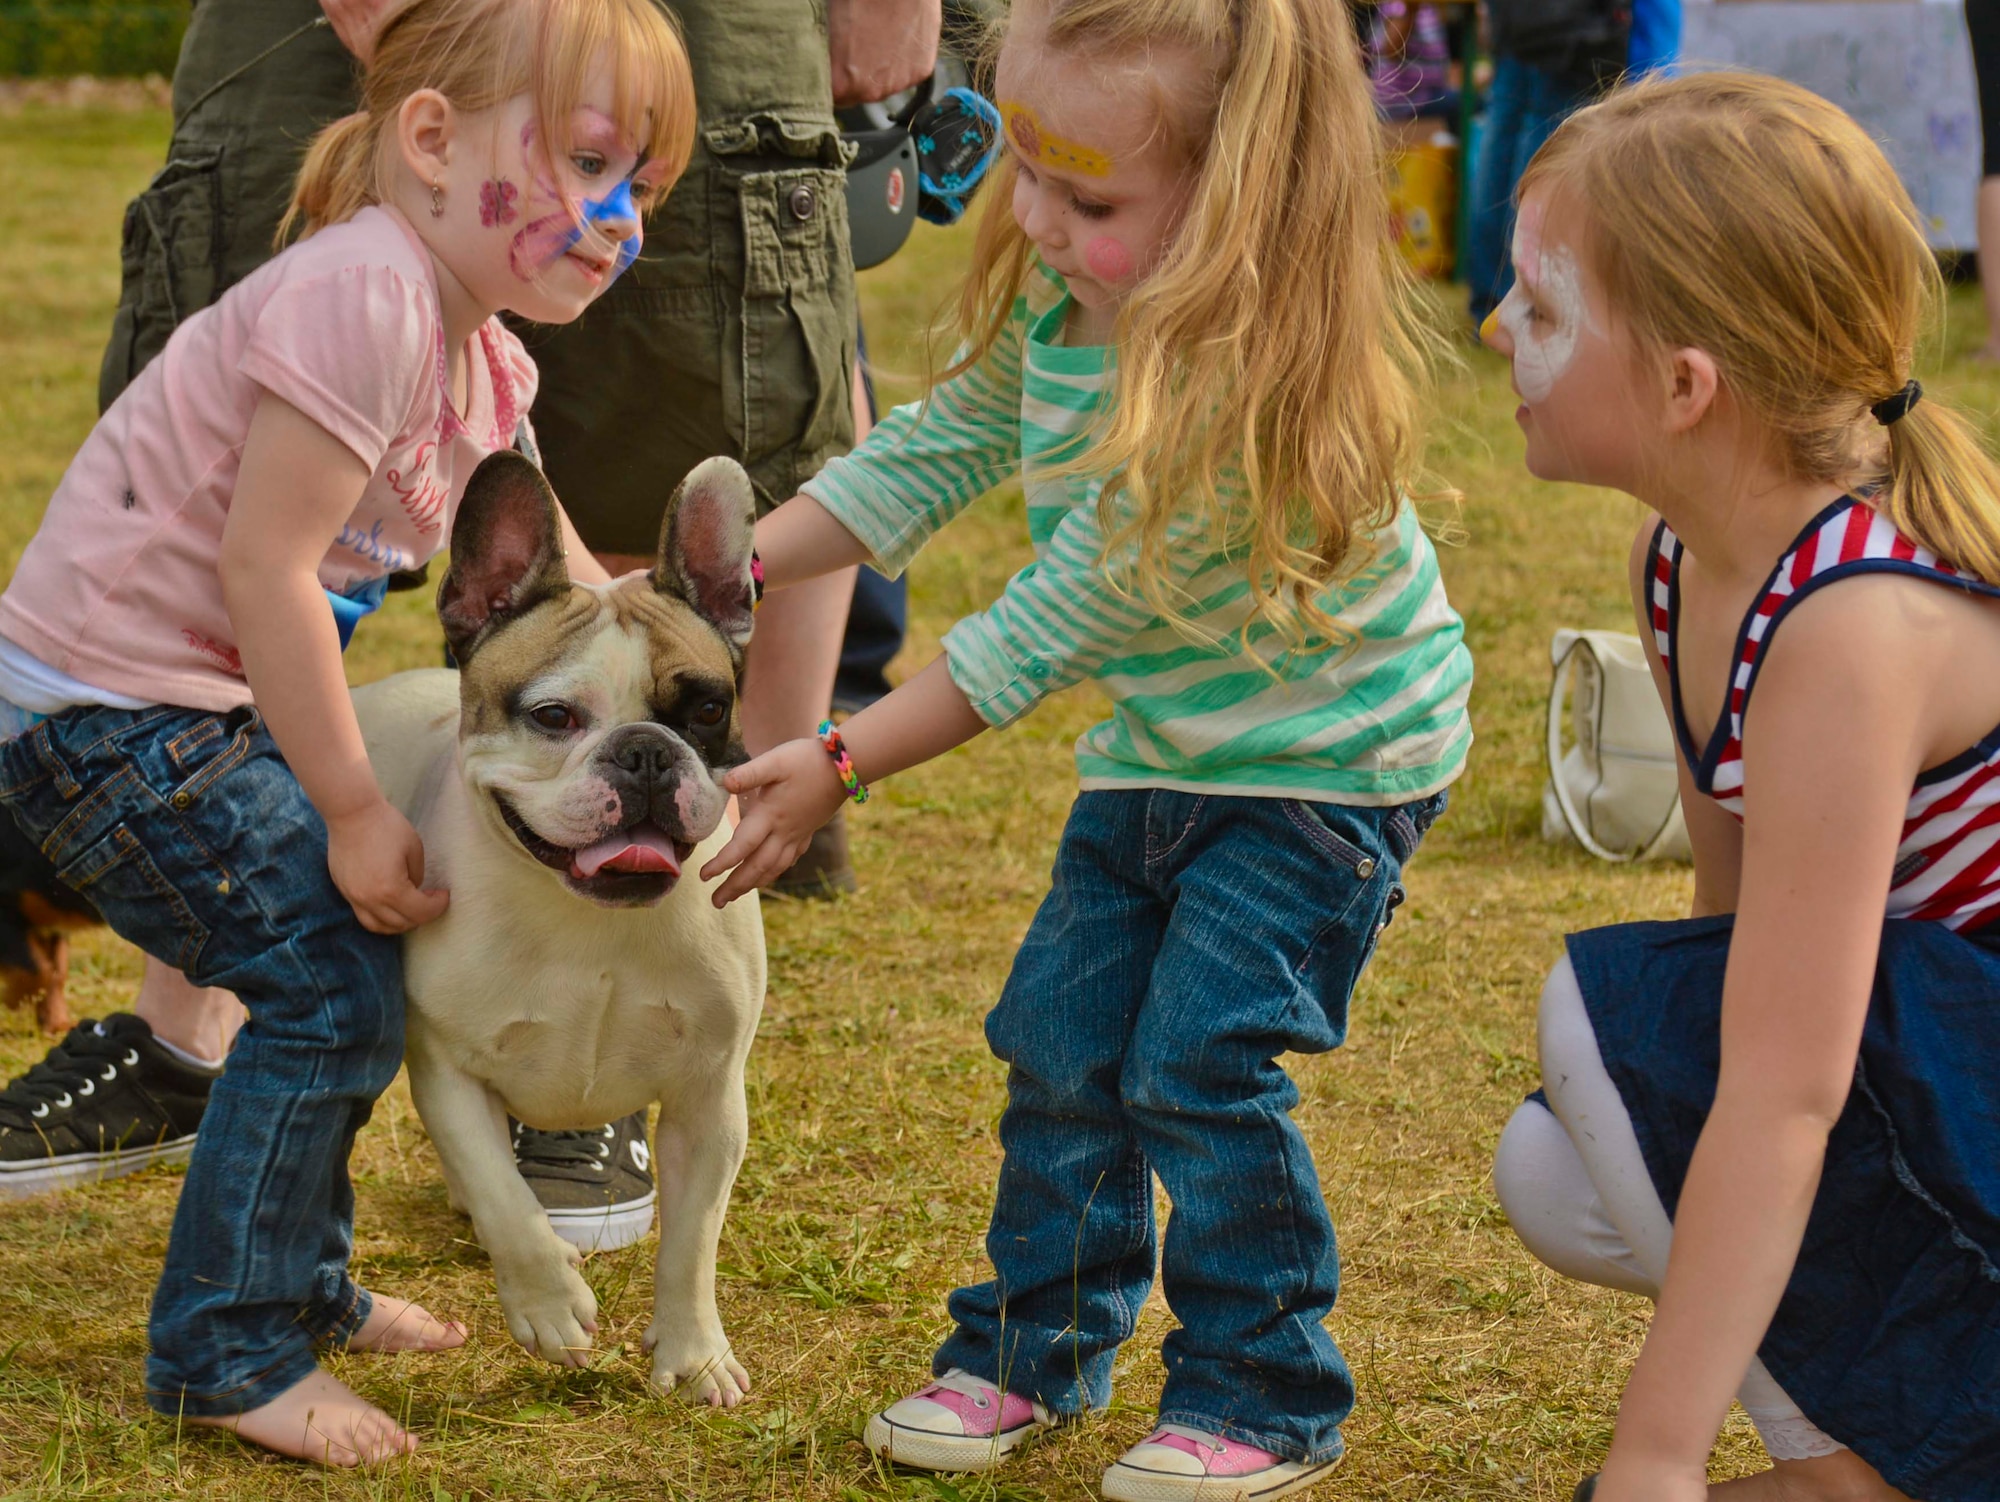 Children pet Roskoe, a French Bulldog, during the Belgian-American Friendship Day at Kleine Brogel Air Base, Belgium, June 27, 2014. Belgian and American children had opportunities to get their faces painted, play in a bouncy castle and play with Frisbees during the complementary event. (U.S. Air Force photo by Staff Sgt. Joe W. McFadden/Released)